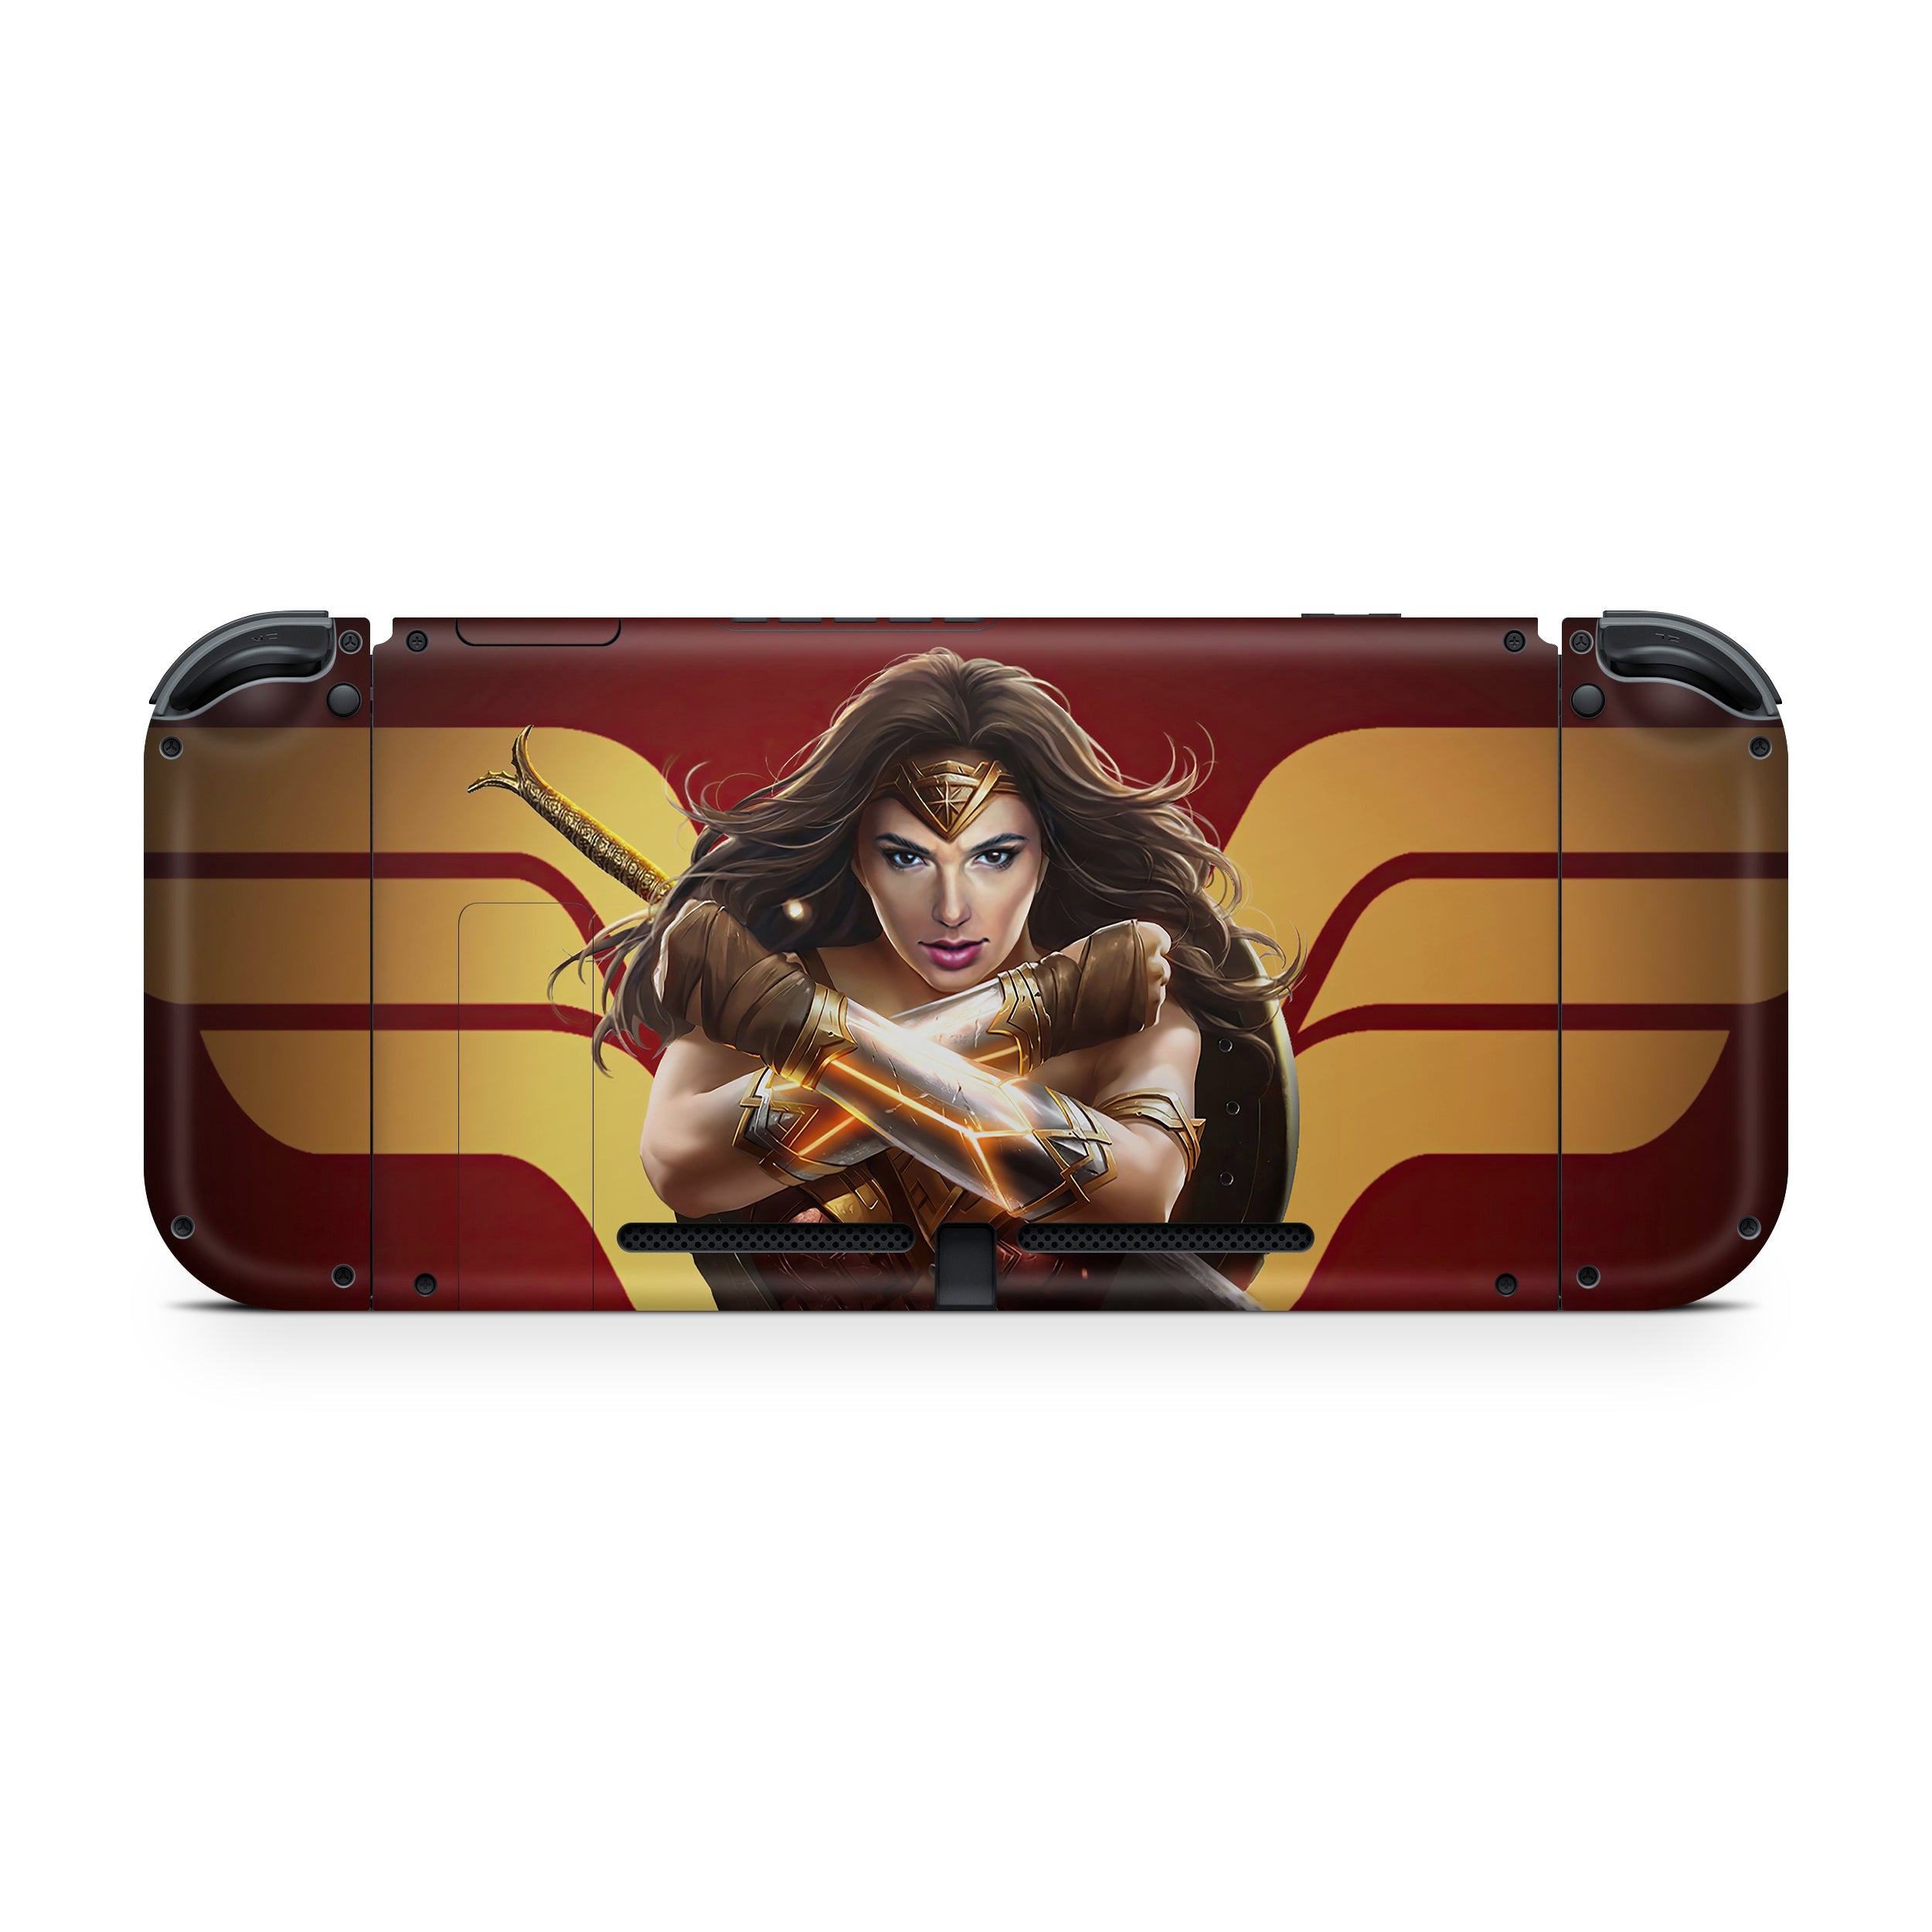 A video game skin featuring a DC Comics Wonder Woman design for the Nintendo Switch.